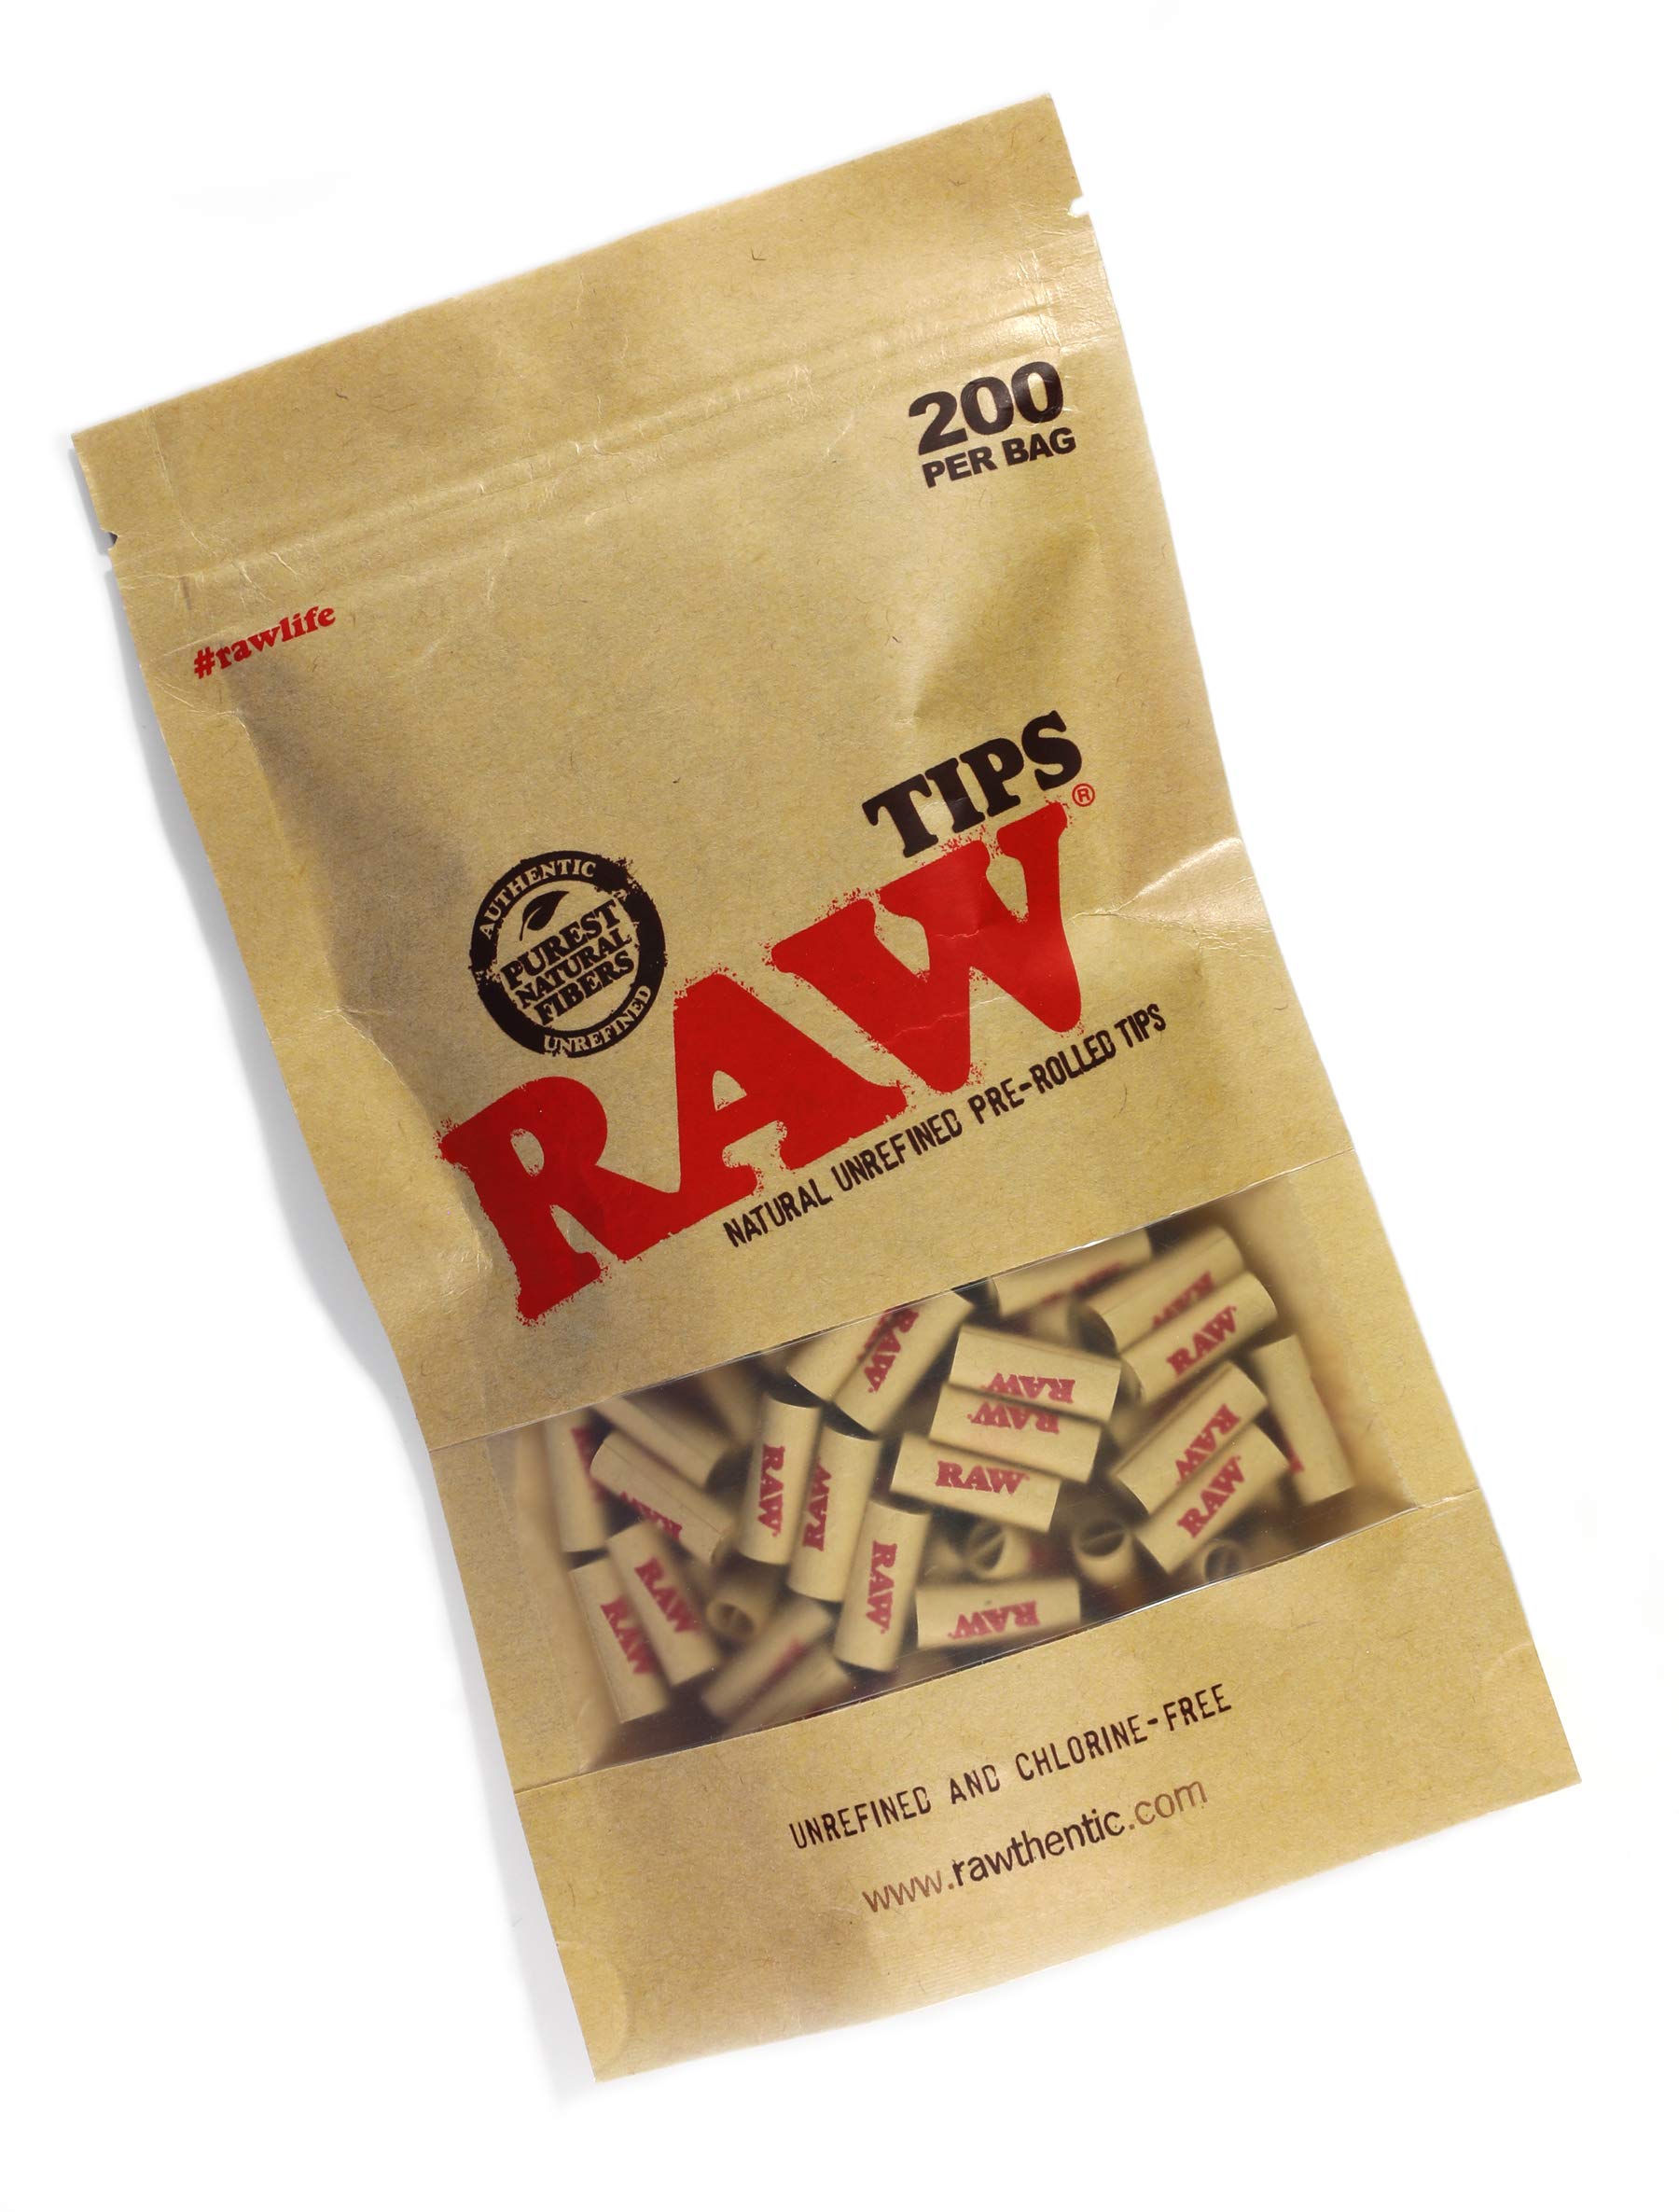 RAW / ロウ NATURAL UNREFINED PRE-ROLLED TIPS 200個入りパック チップ ローチ フィルター